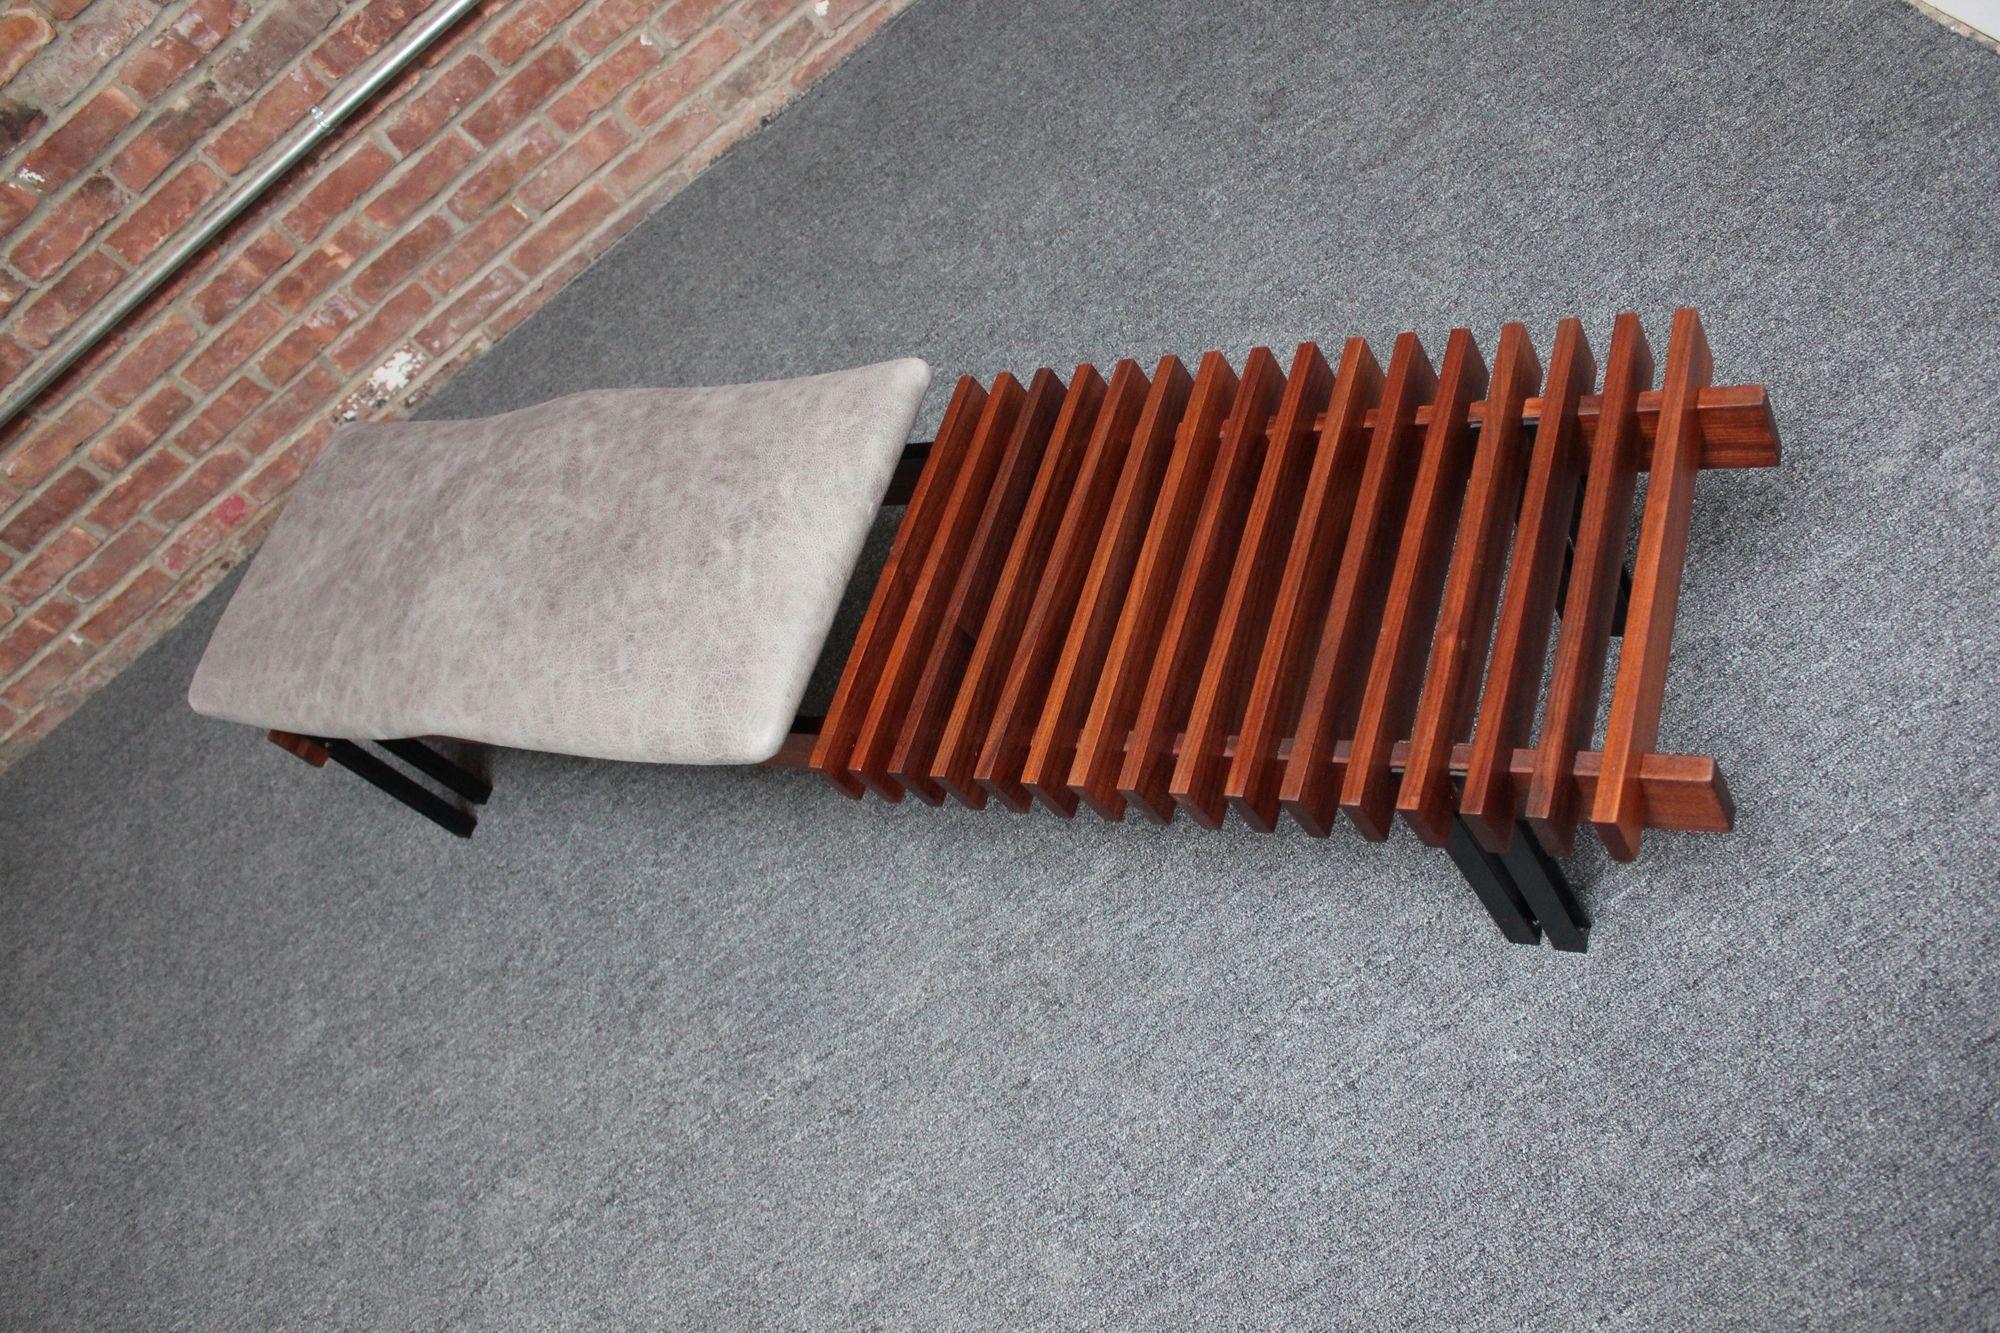 Italian Modernist Teak and Leather Bench by Inge and Luciano Rubino For Sale 13